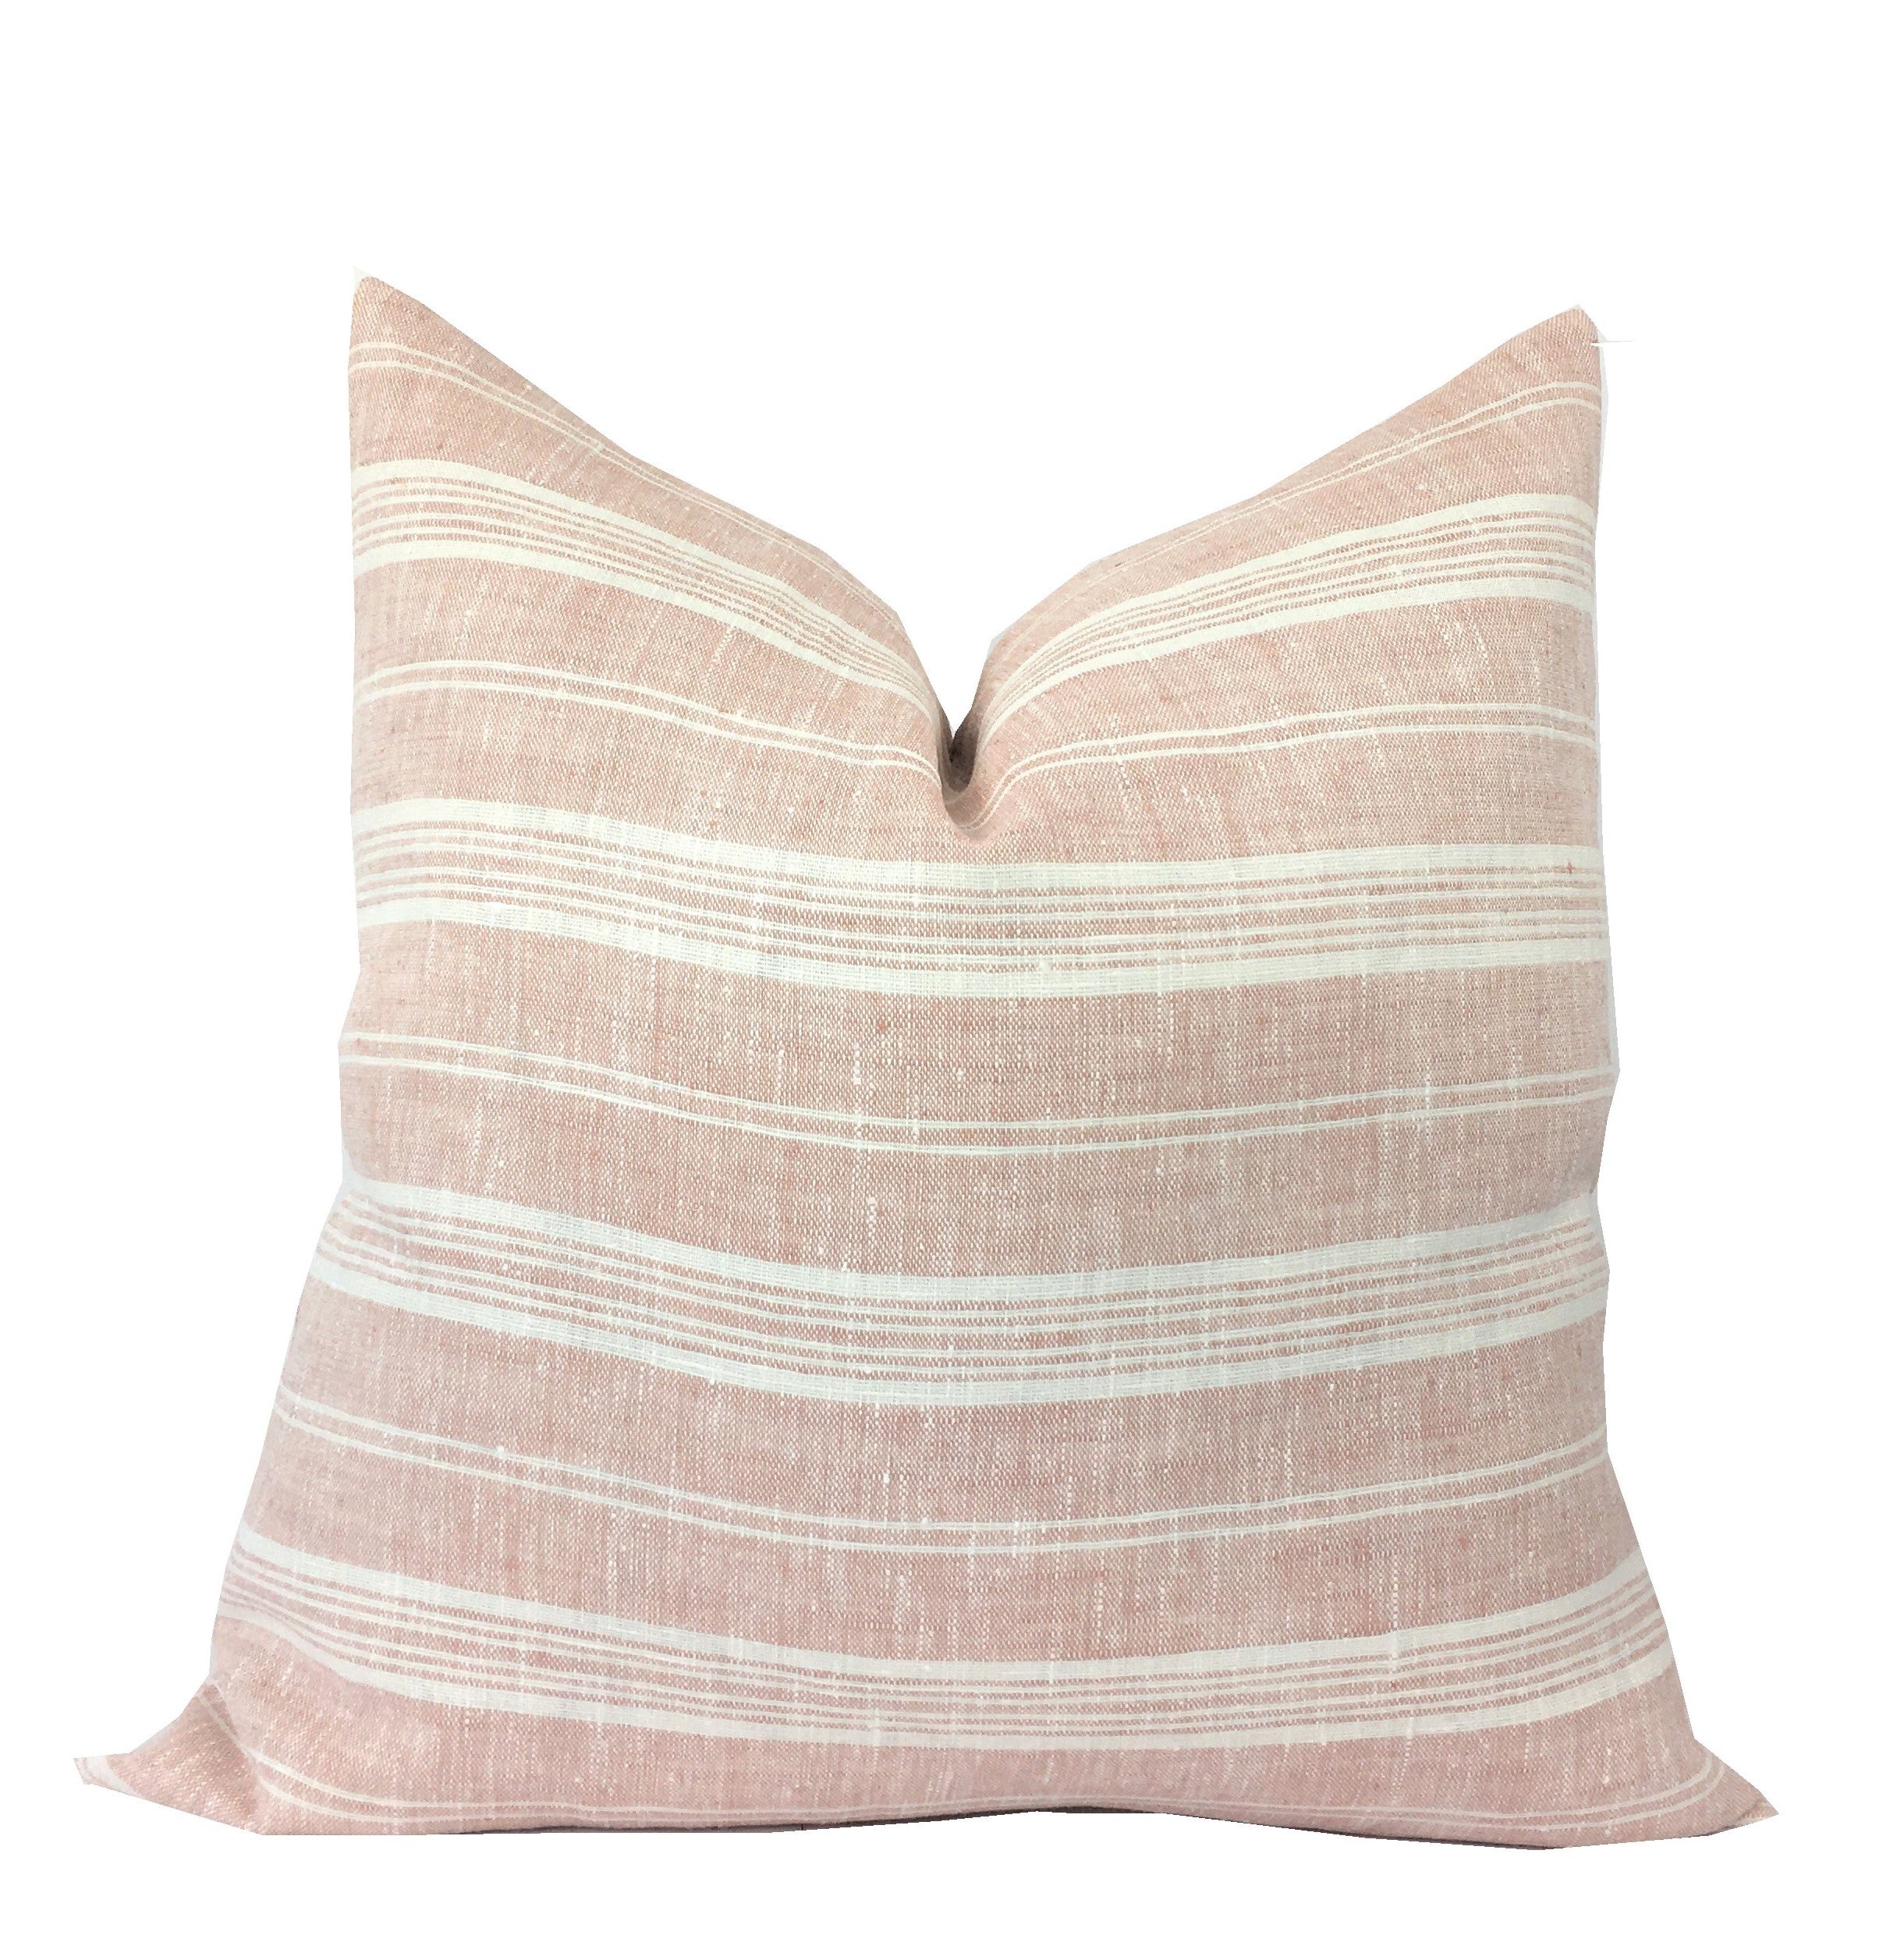 Linen White, Pink, Rust, Solid Decorative Pillow Cover. Accent